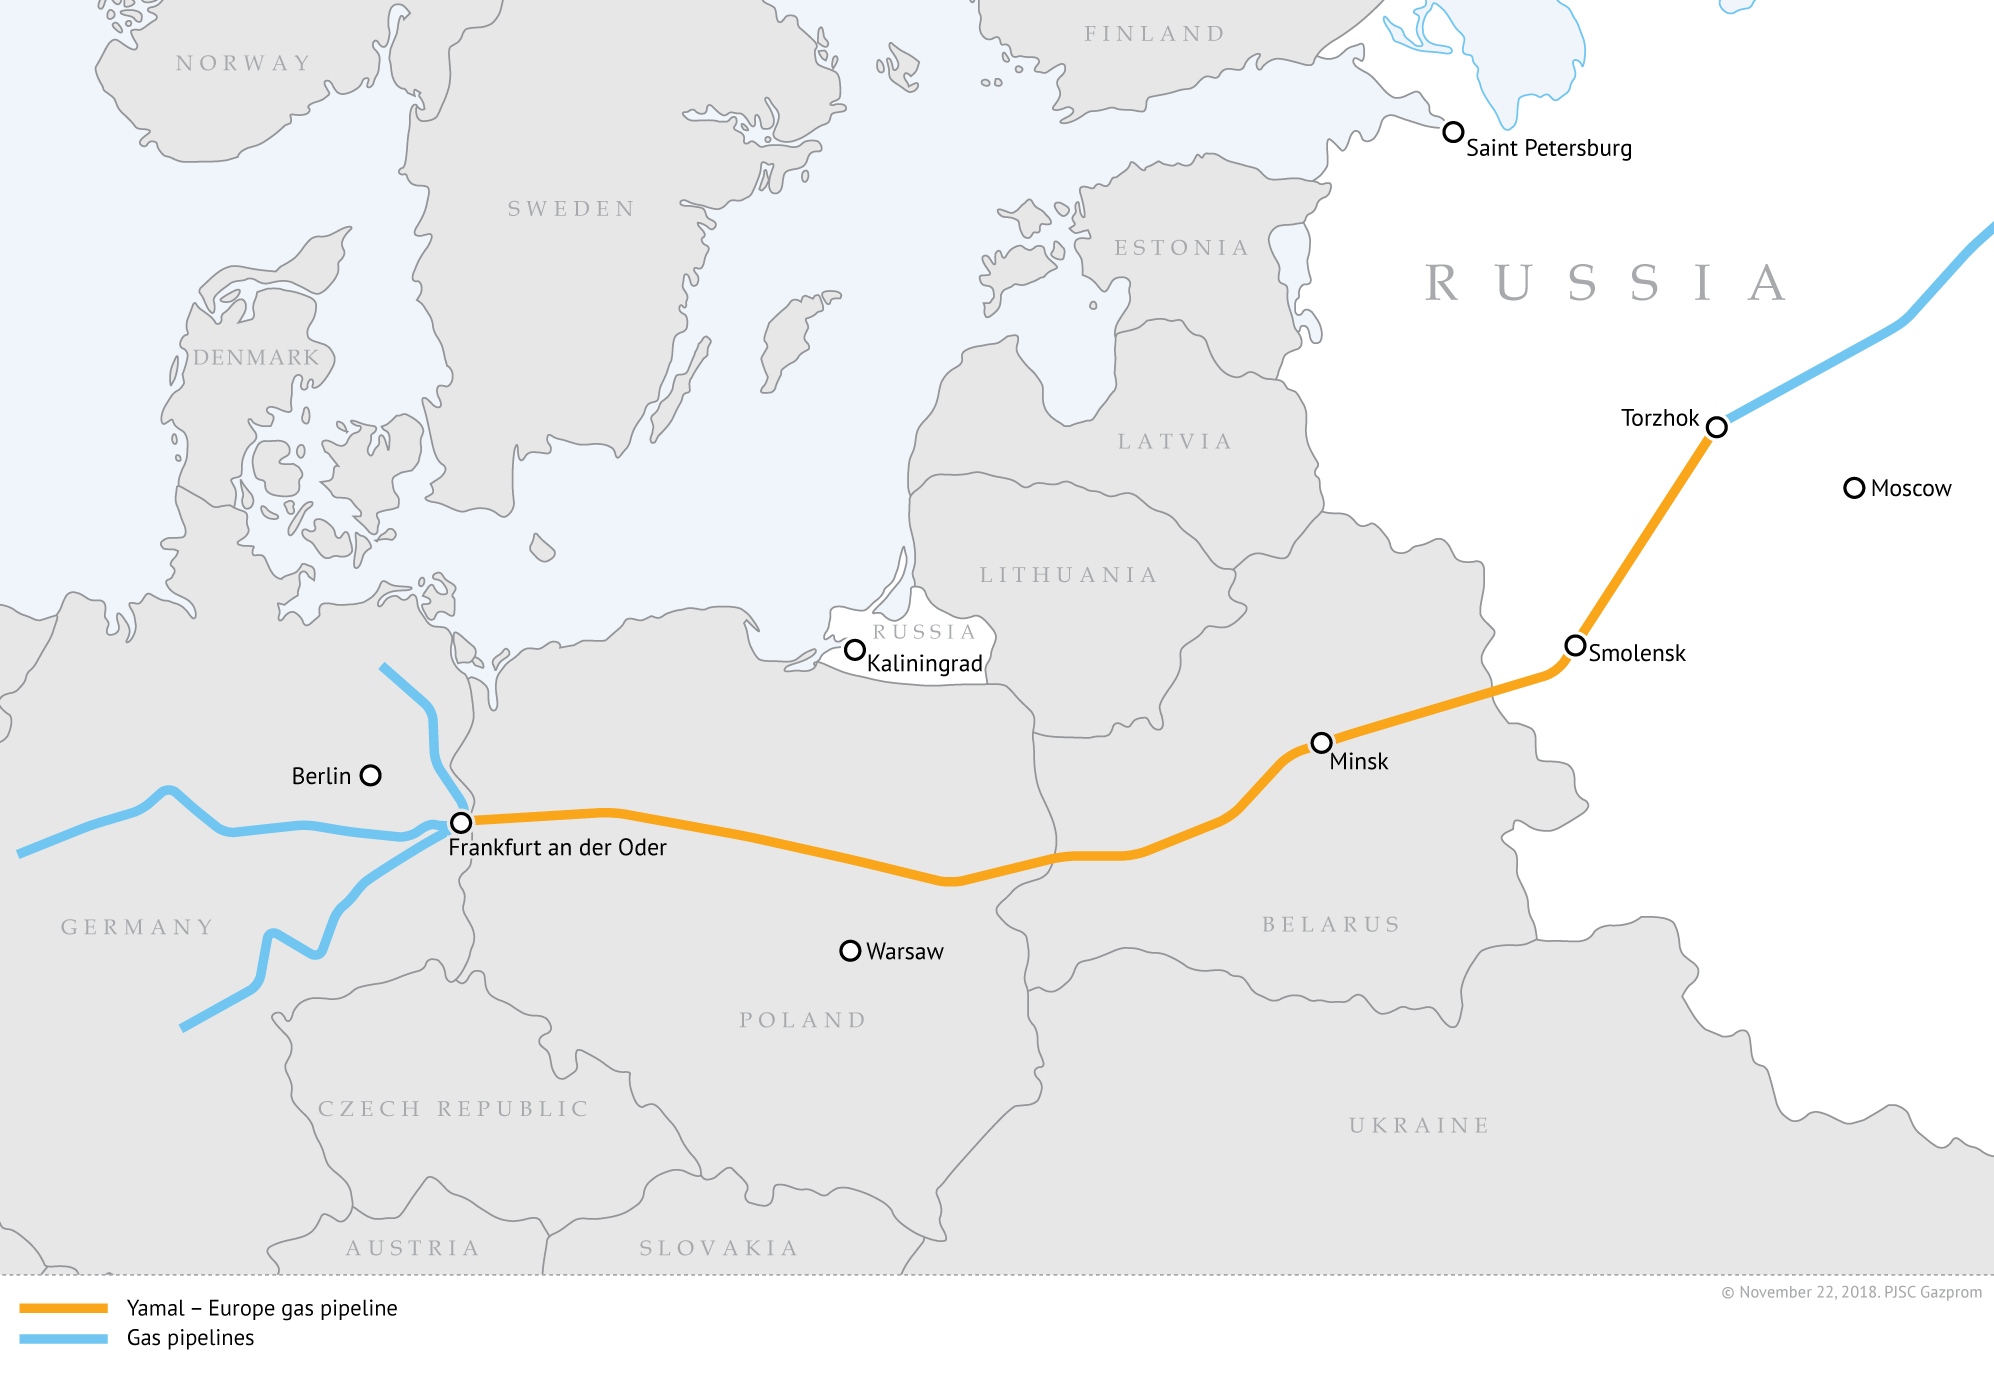 Gas transit service via the Jamal Gas Pipeline carried out in accordance with orders made by customers - MarinePoland.com